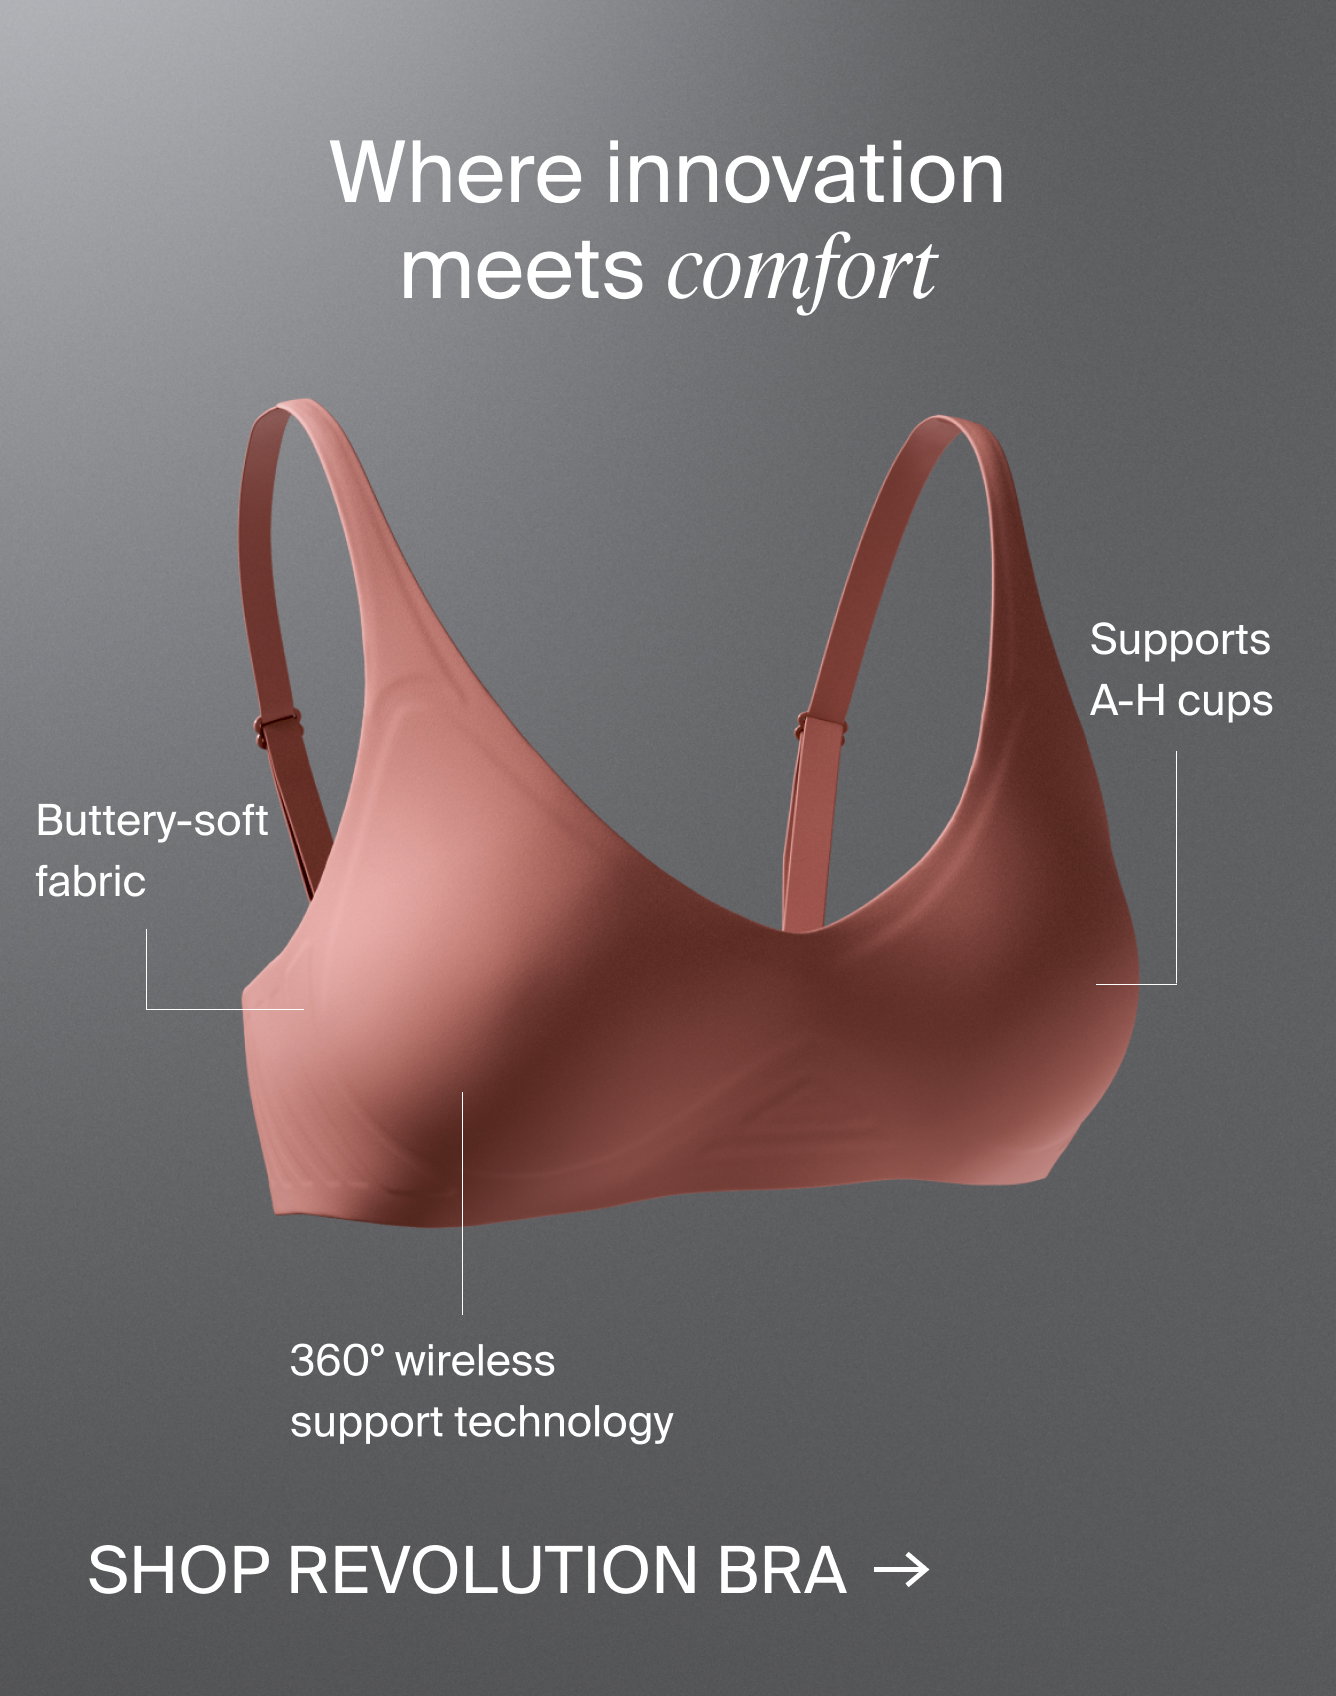 Knix CA: Re: THE BRA that took over 3 years to develop